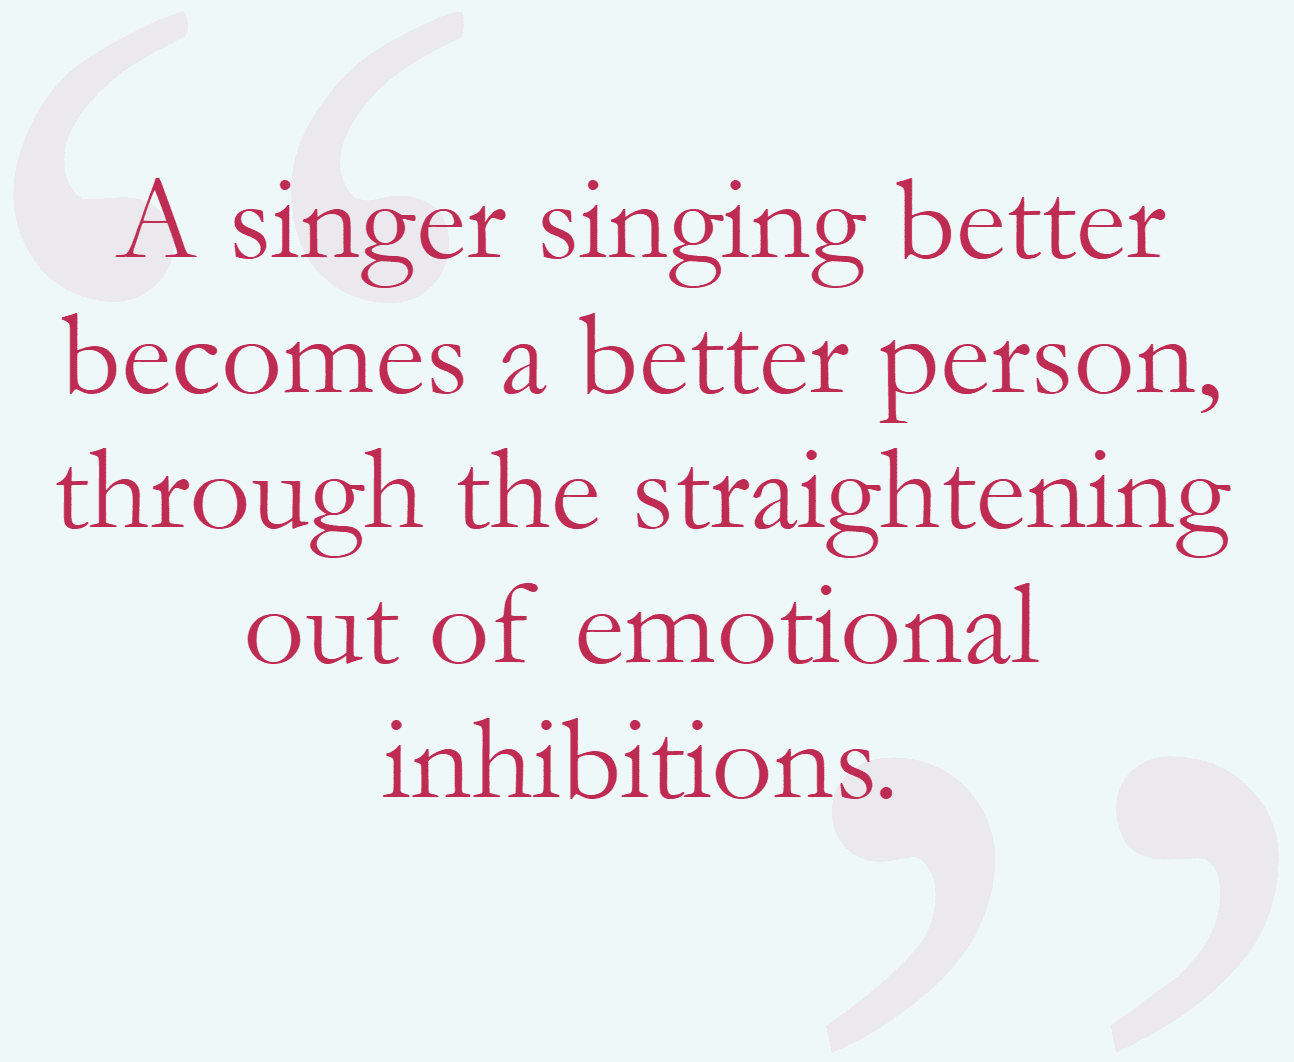 "A singer singing better becomes a better person, through the straightening out of emotional inhibitions."